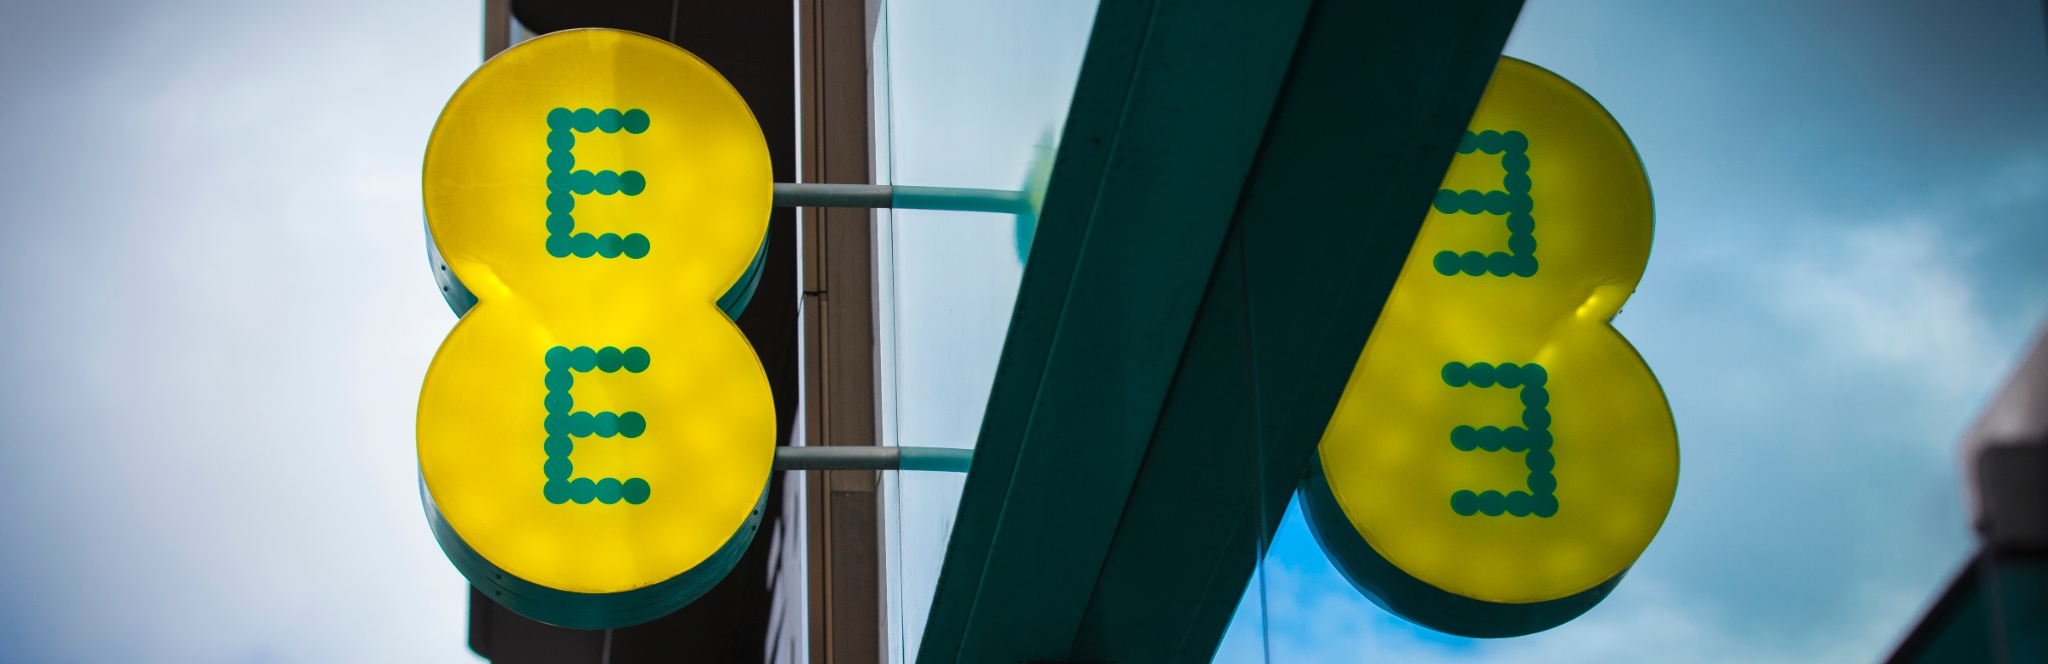 How does your business become an EE Reseller?